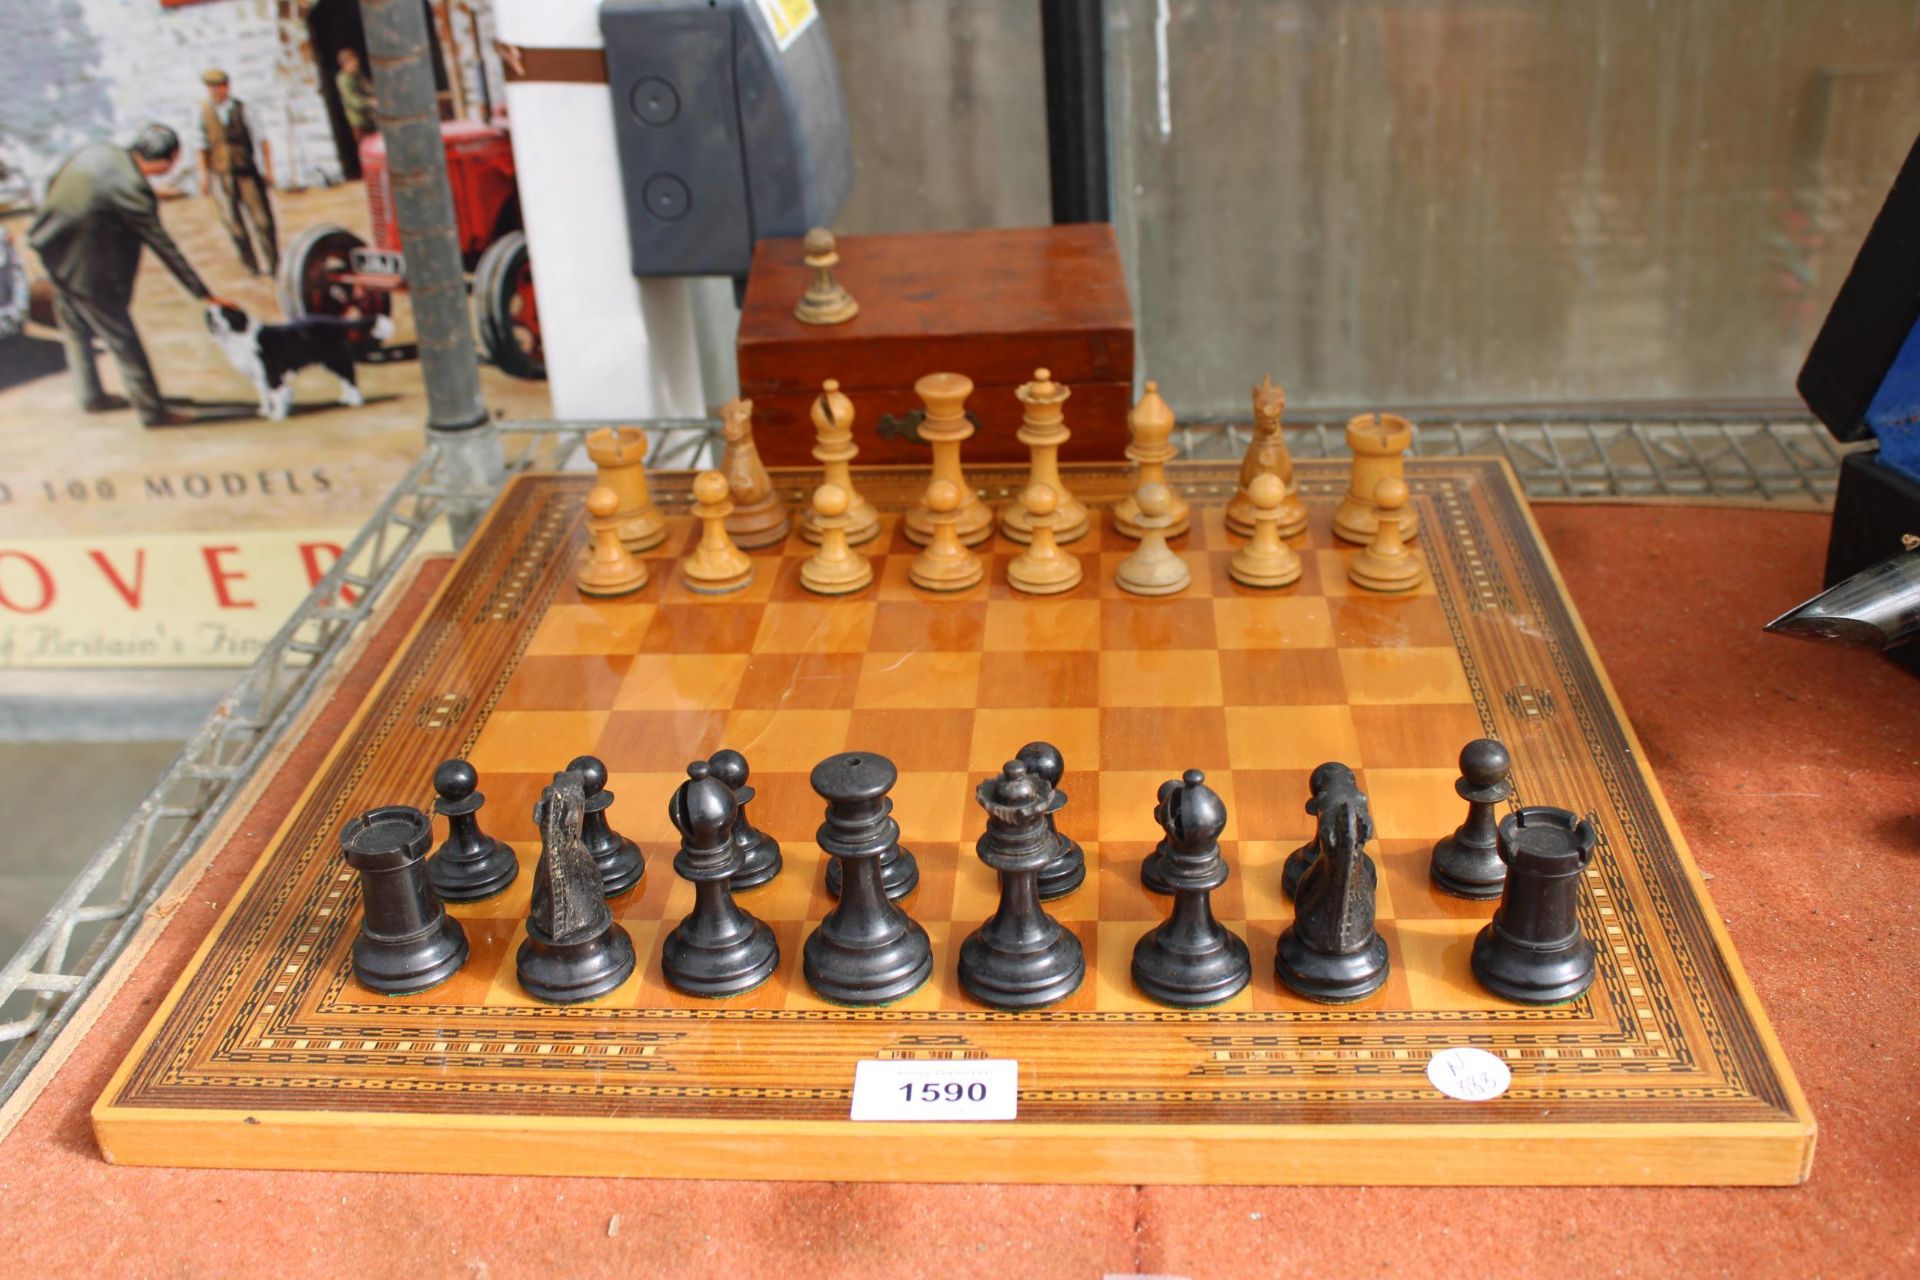 A VINTAGE CHESS BOARD WITH A CHESS SET (ONE PIECE IS A REPLACEMENT)